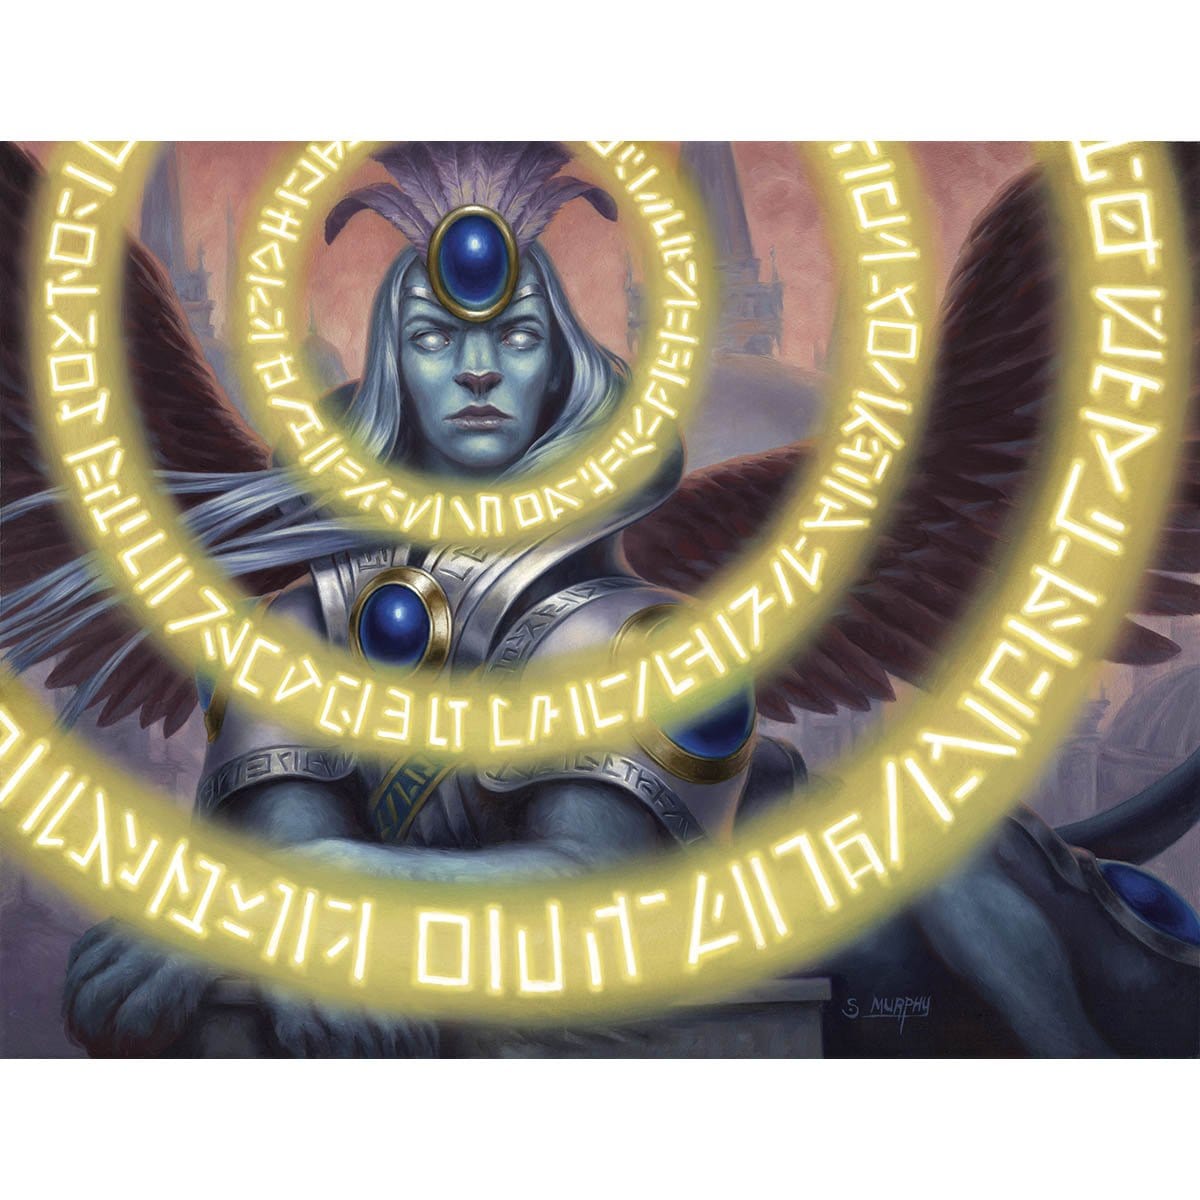 Sphinx's Insight Print - Print - Original Magic Art - Accessories for Magic the Gathering and other card games